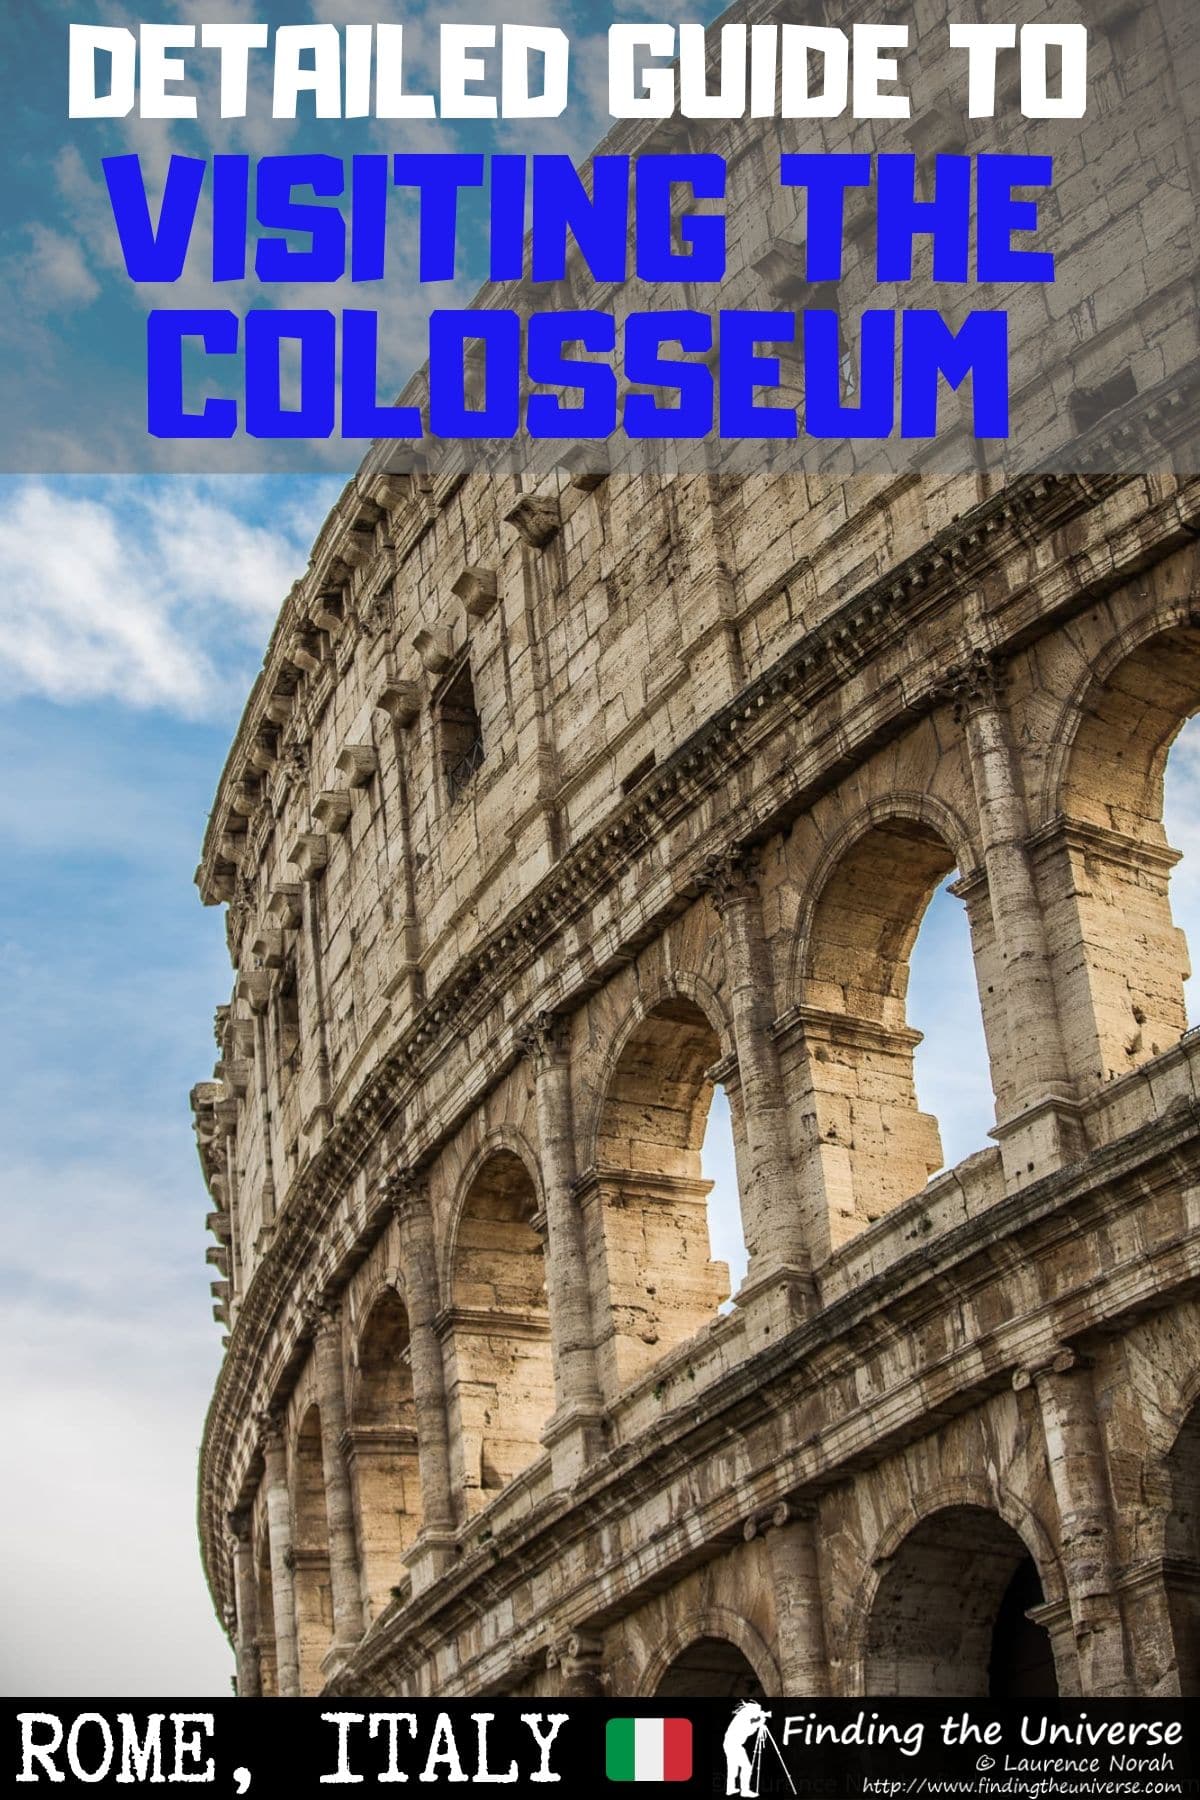 A comprehensive guide to visiting the Colosseum in Rome, including the best tours, how to buy tickets, where to stay near the Colosseum, and more!